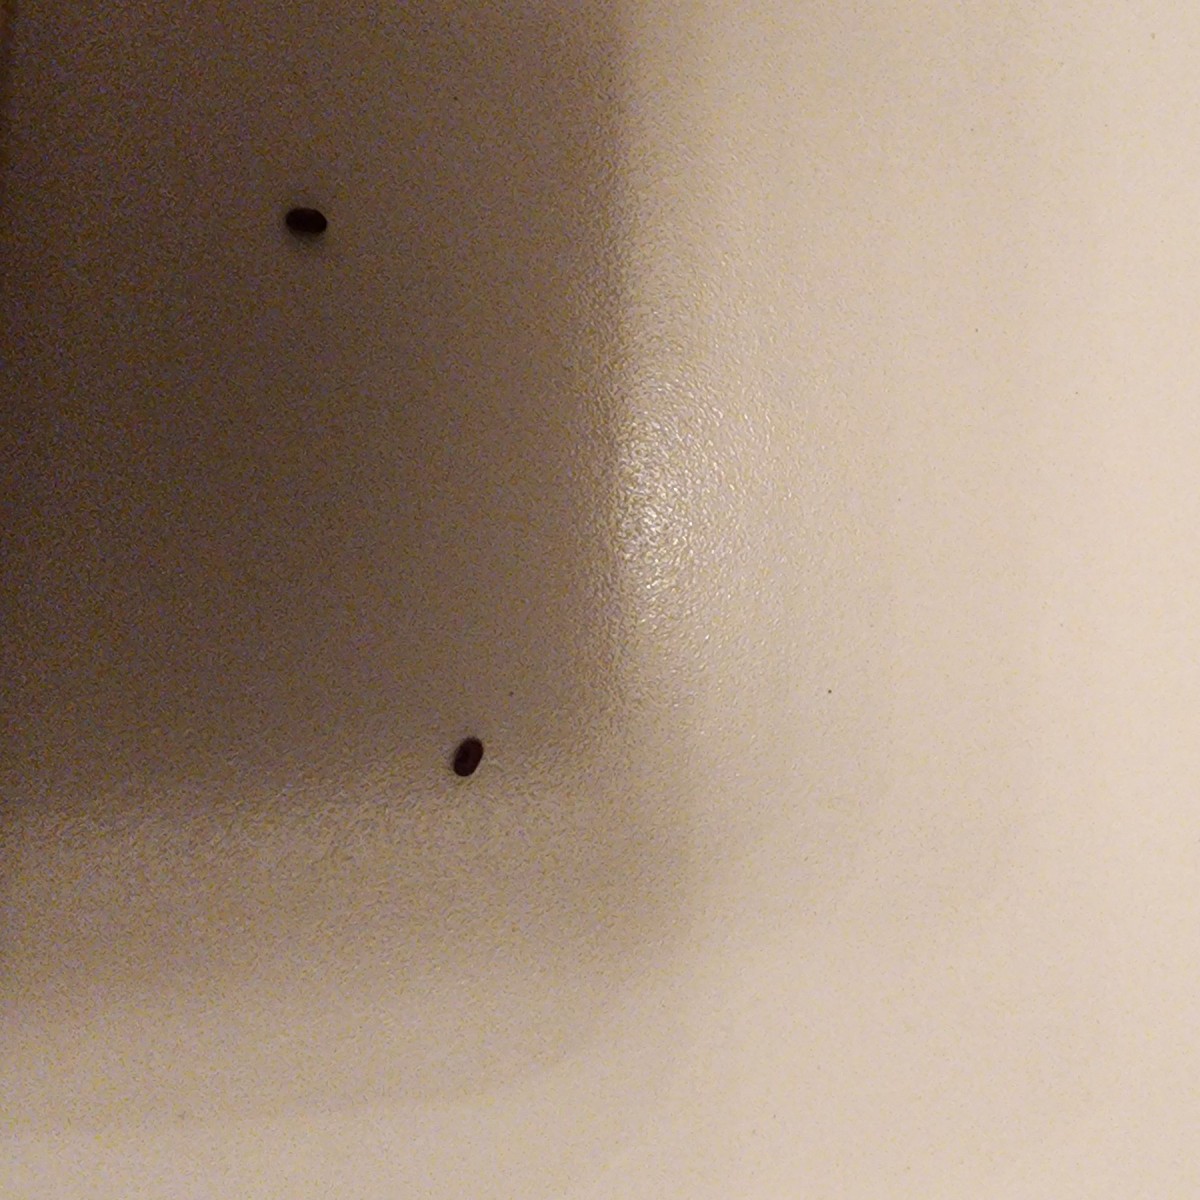 What Is This Very Tiny Brown Bug Tx3 